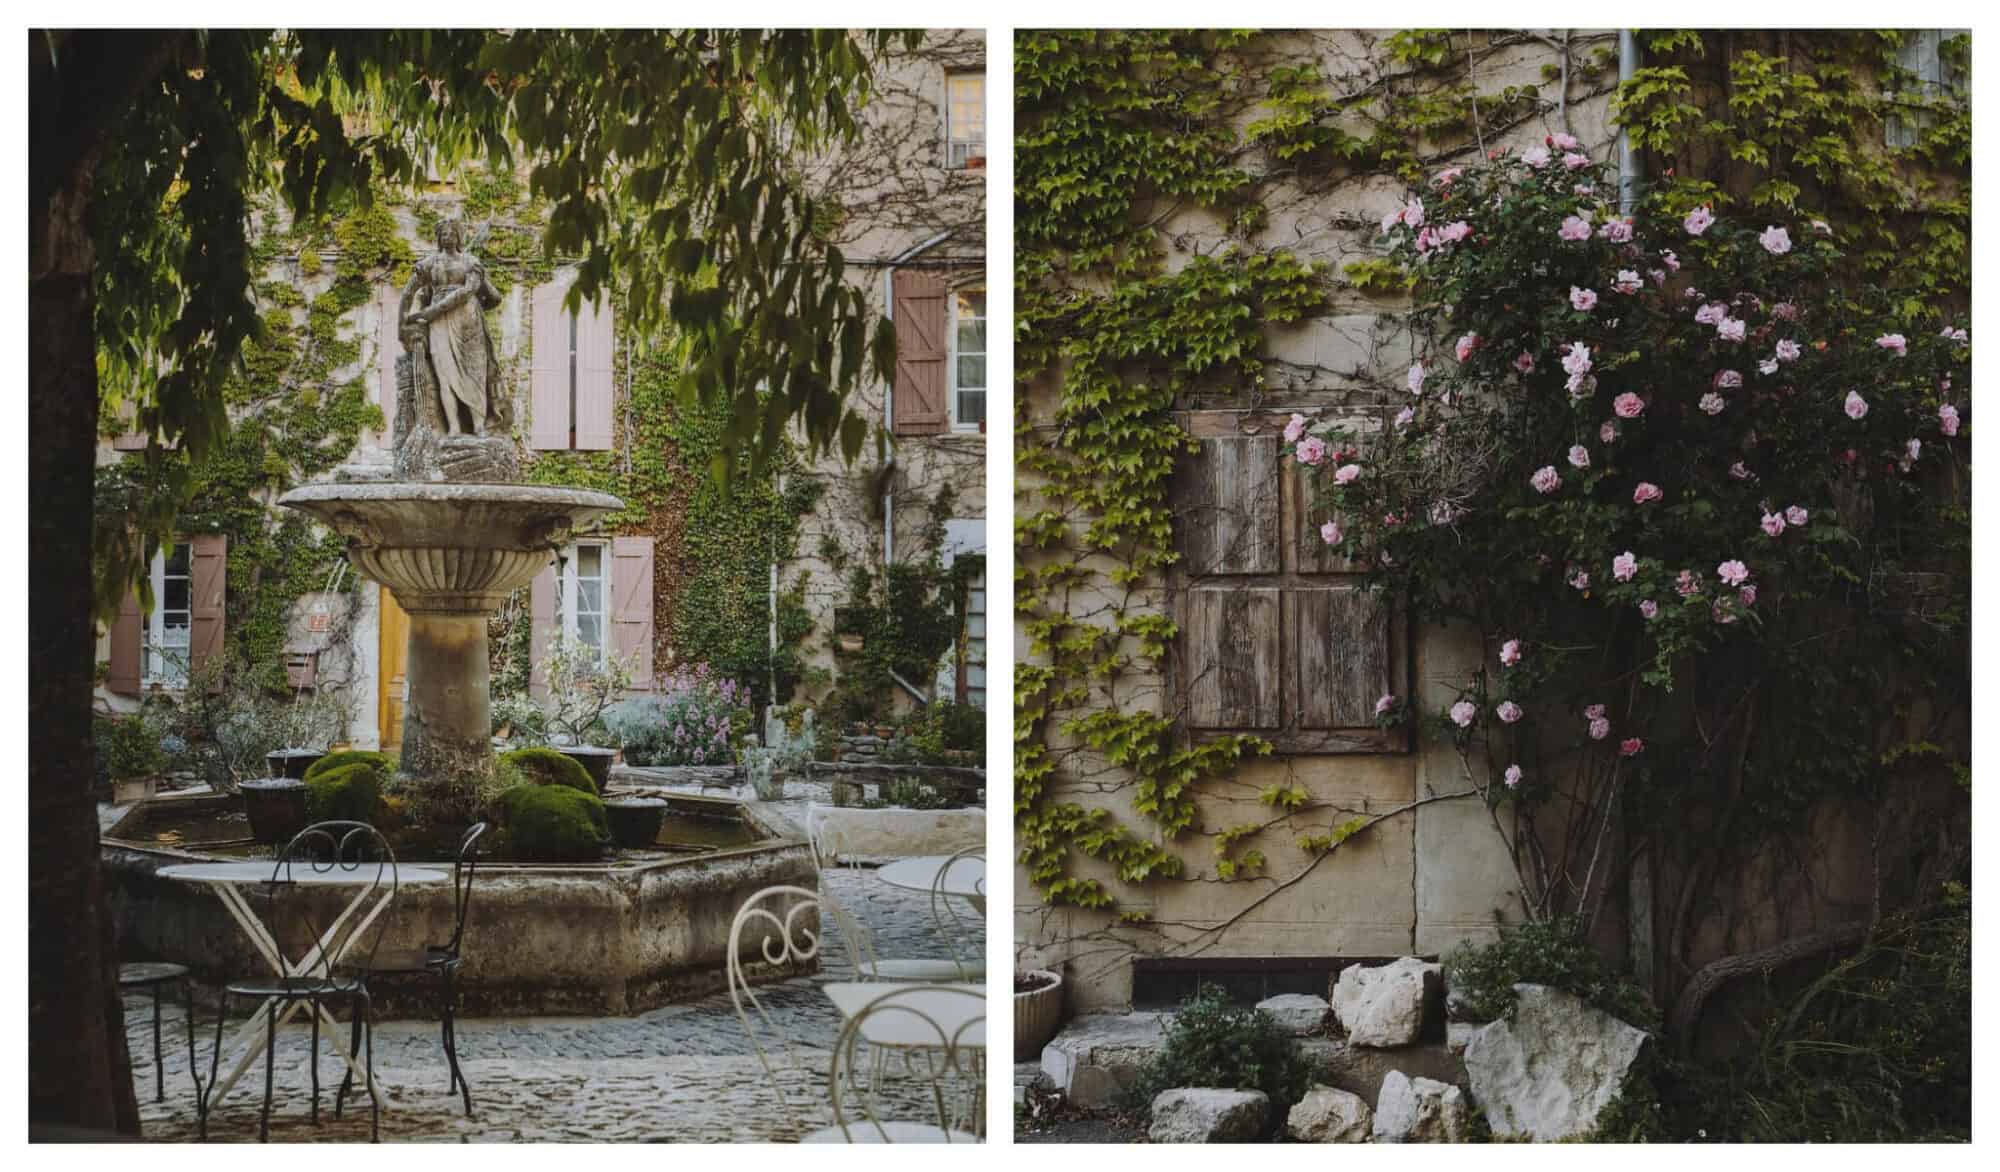 Left: a fountain in Provence, Right: a wall overgrown with leaves and flowers